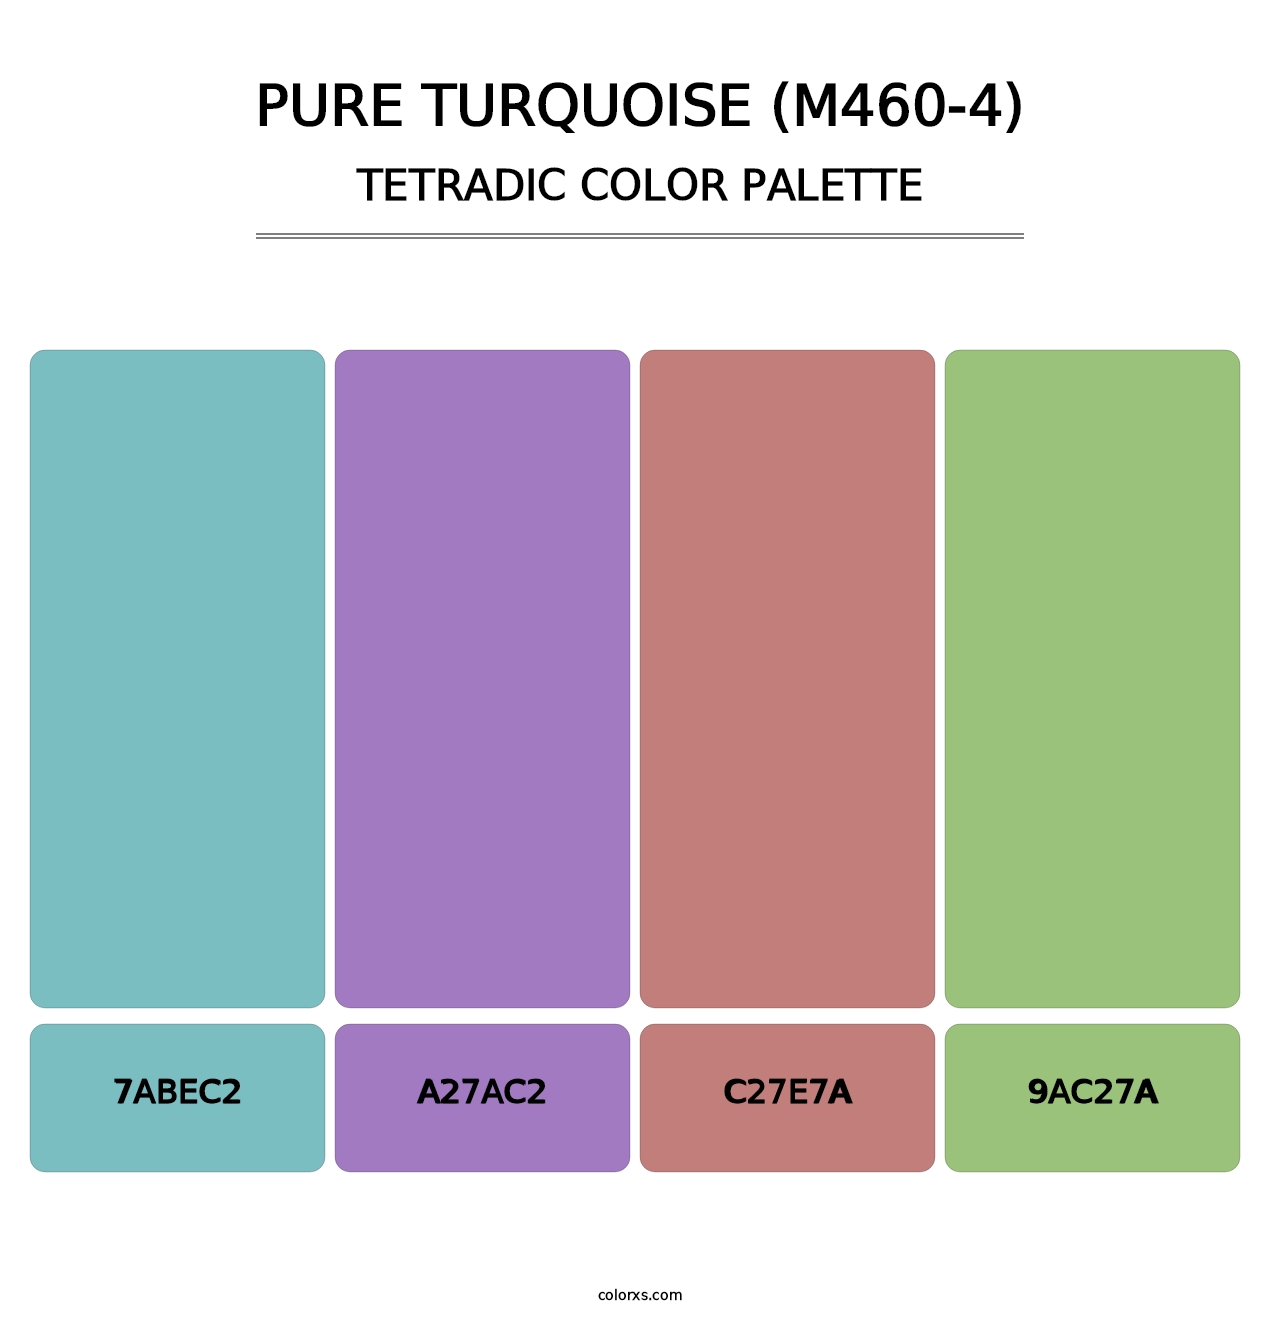 Pure Turquoise (M460-4) - Tetradic Color Palette